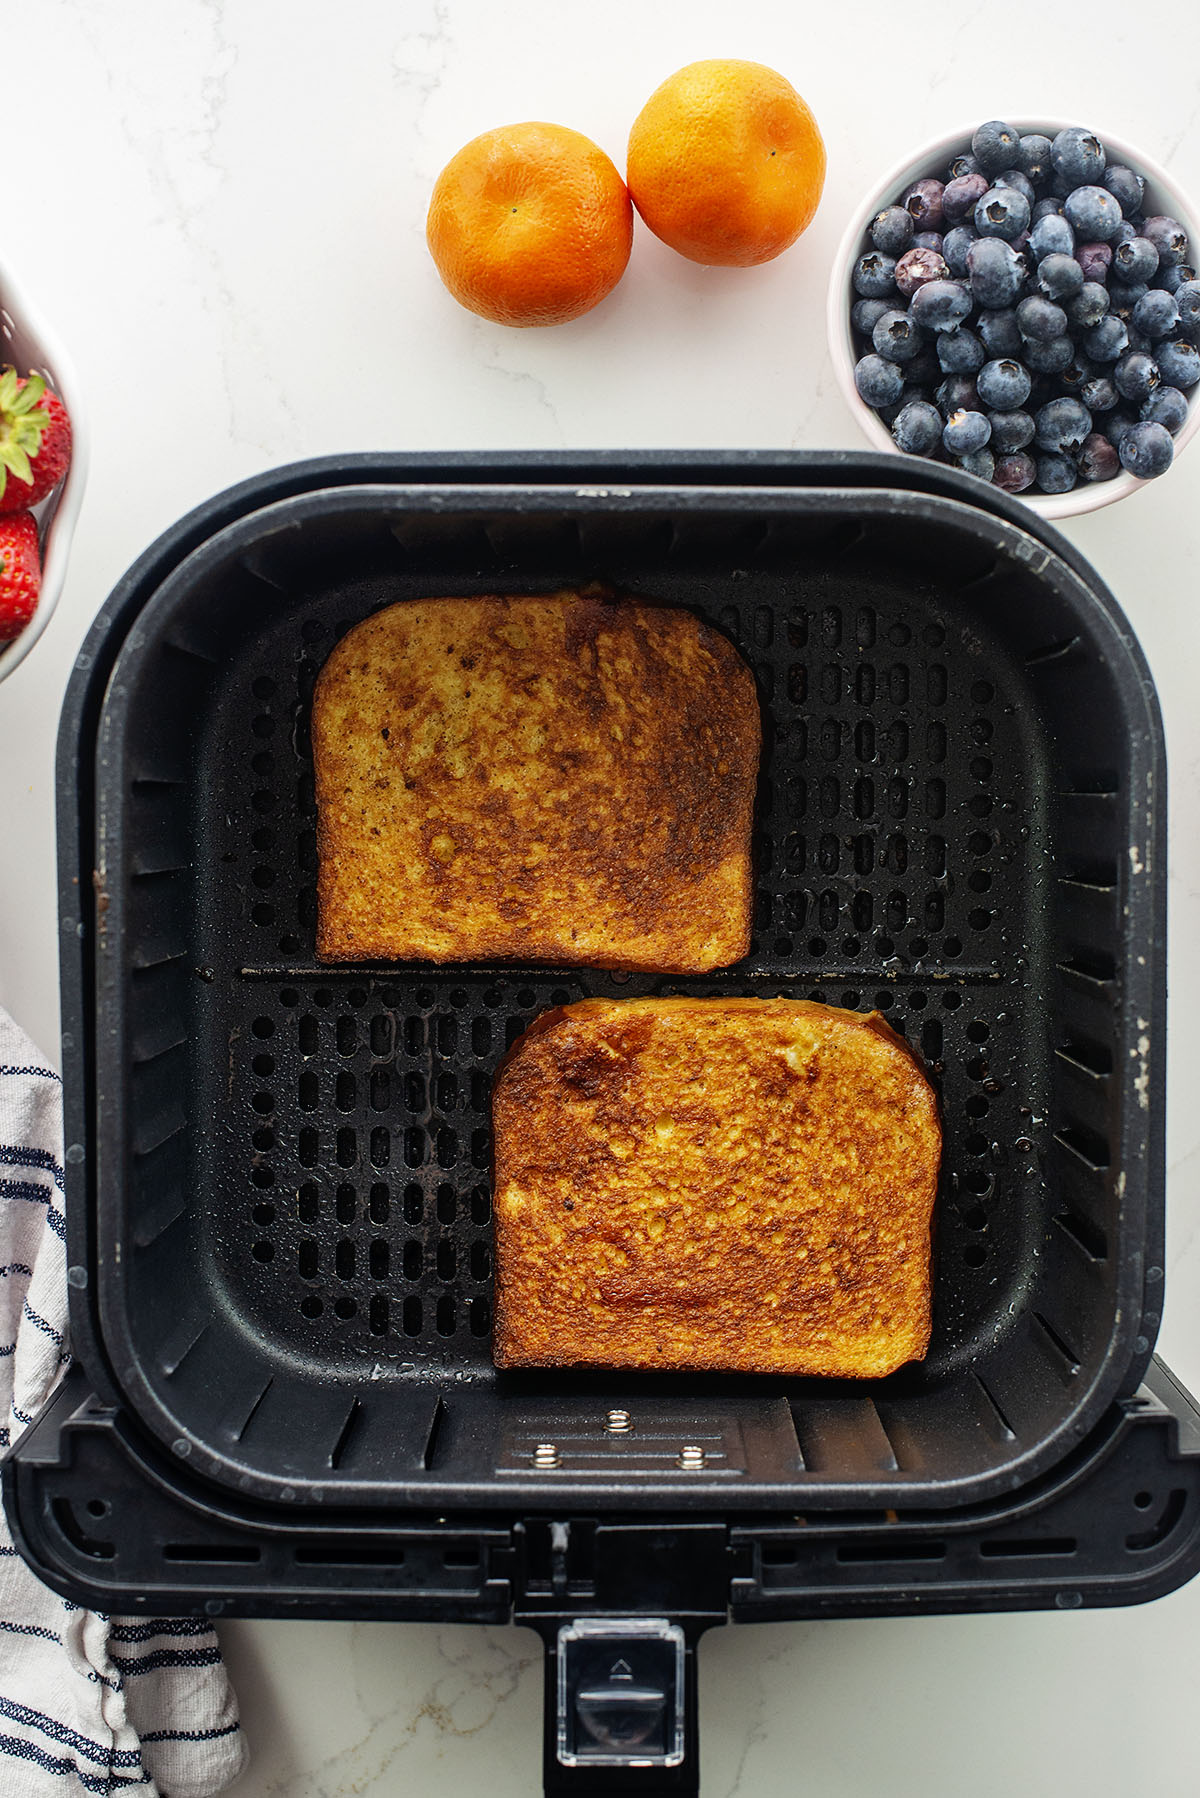 Cooked French toast in an air fryer